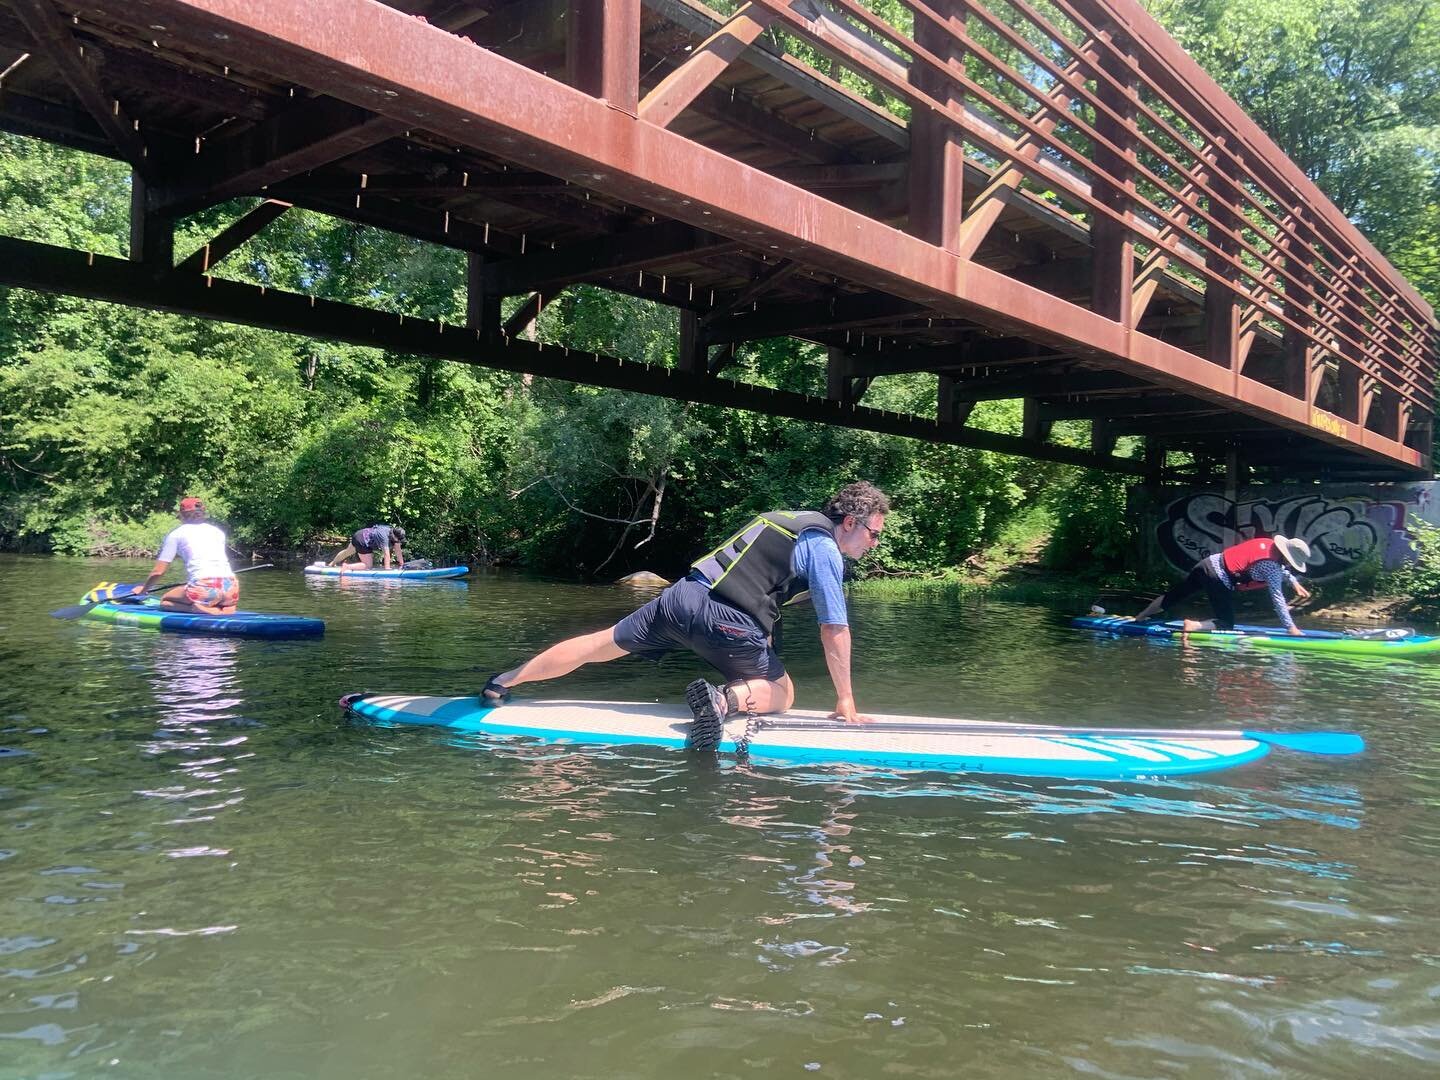 The class of 2021 Root SUP Yoga Teachers have officially graduated!! 🎉🎉🎉
It was a hot but beautiful full day of training on the Huron river!